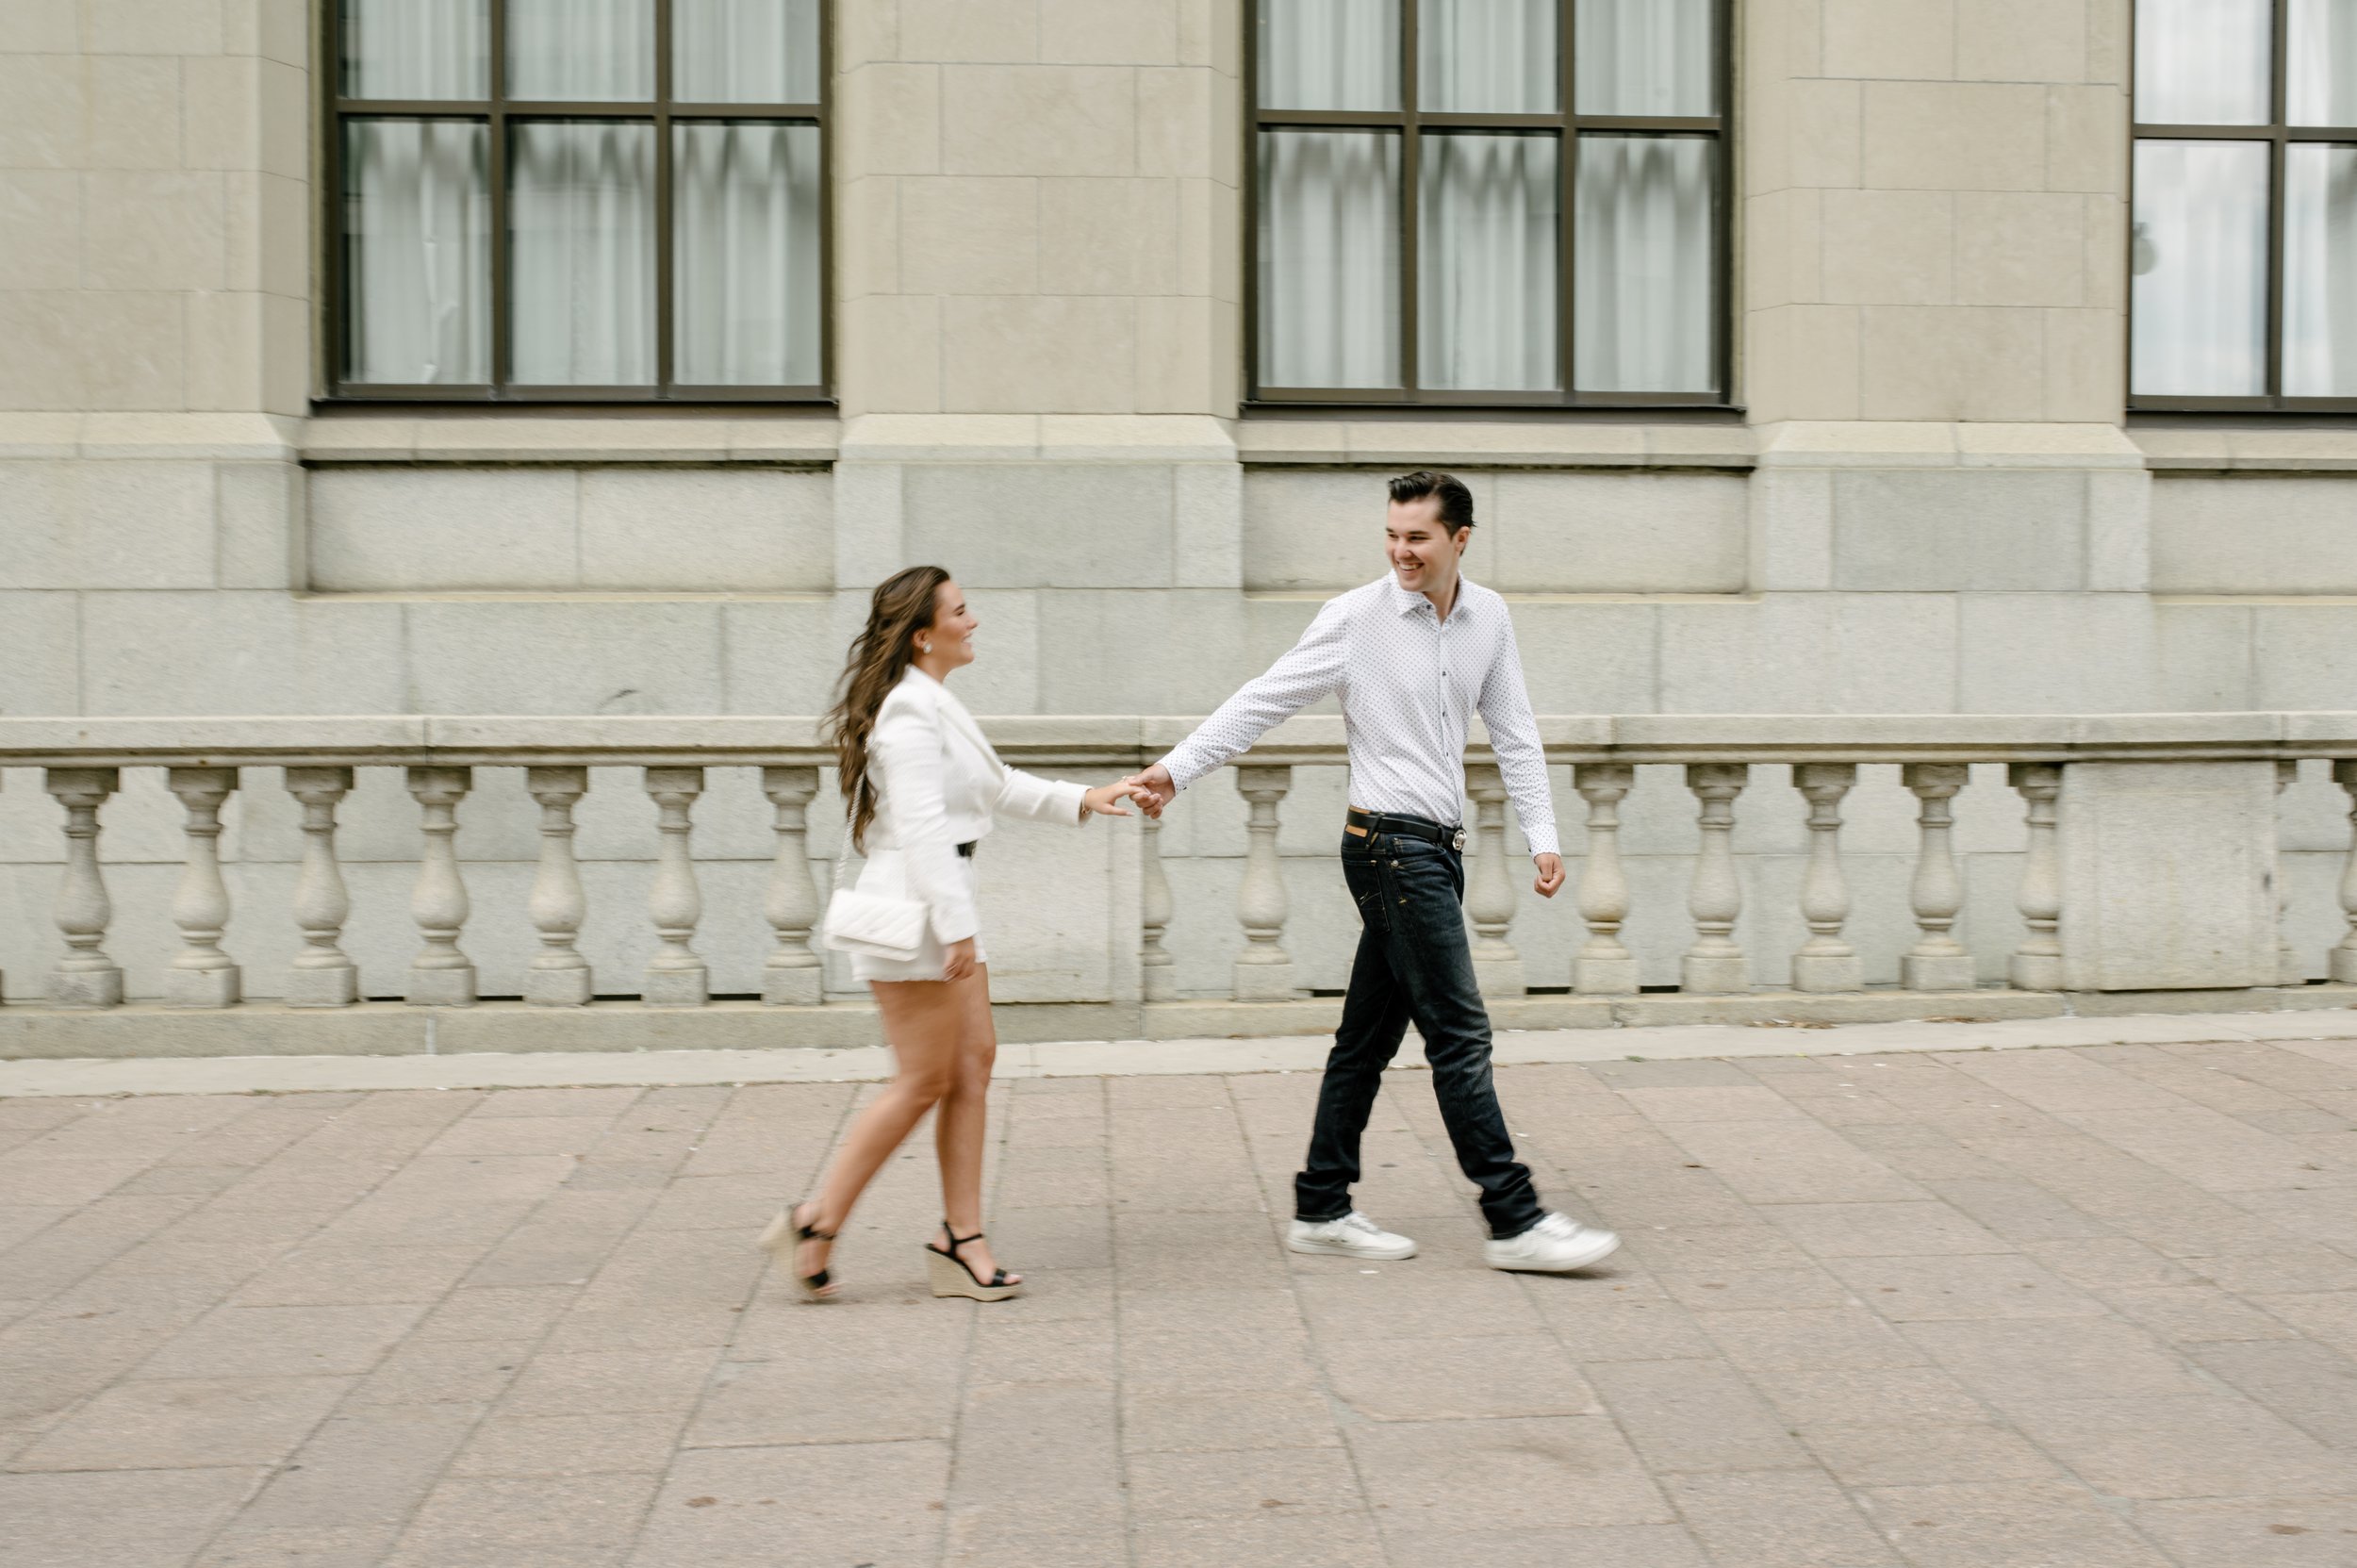 Engagement photograph in downtown ottawa (Copy)